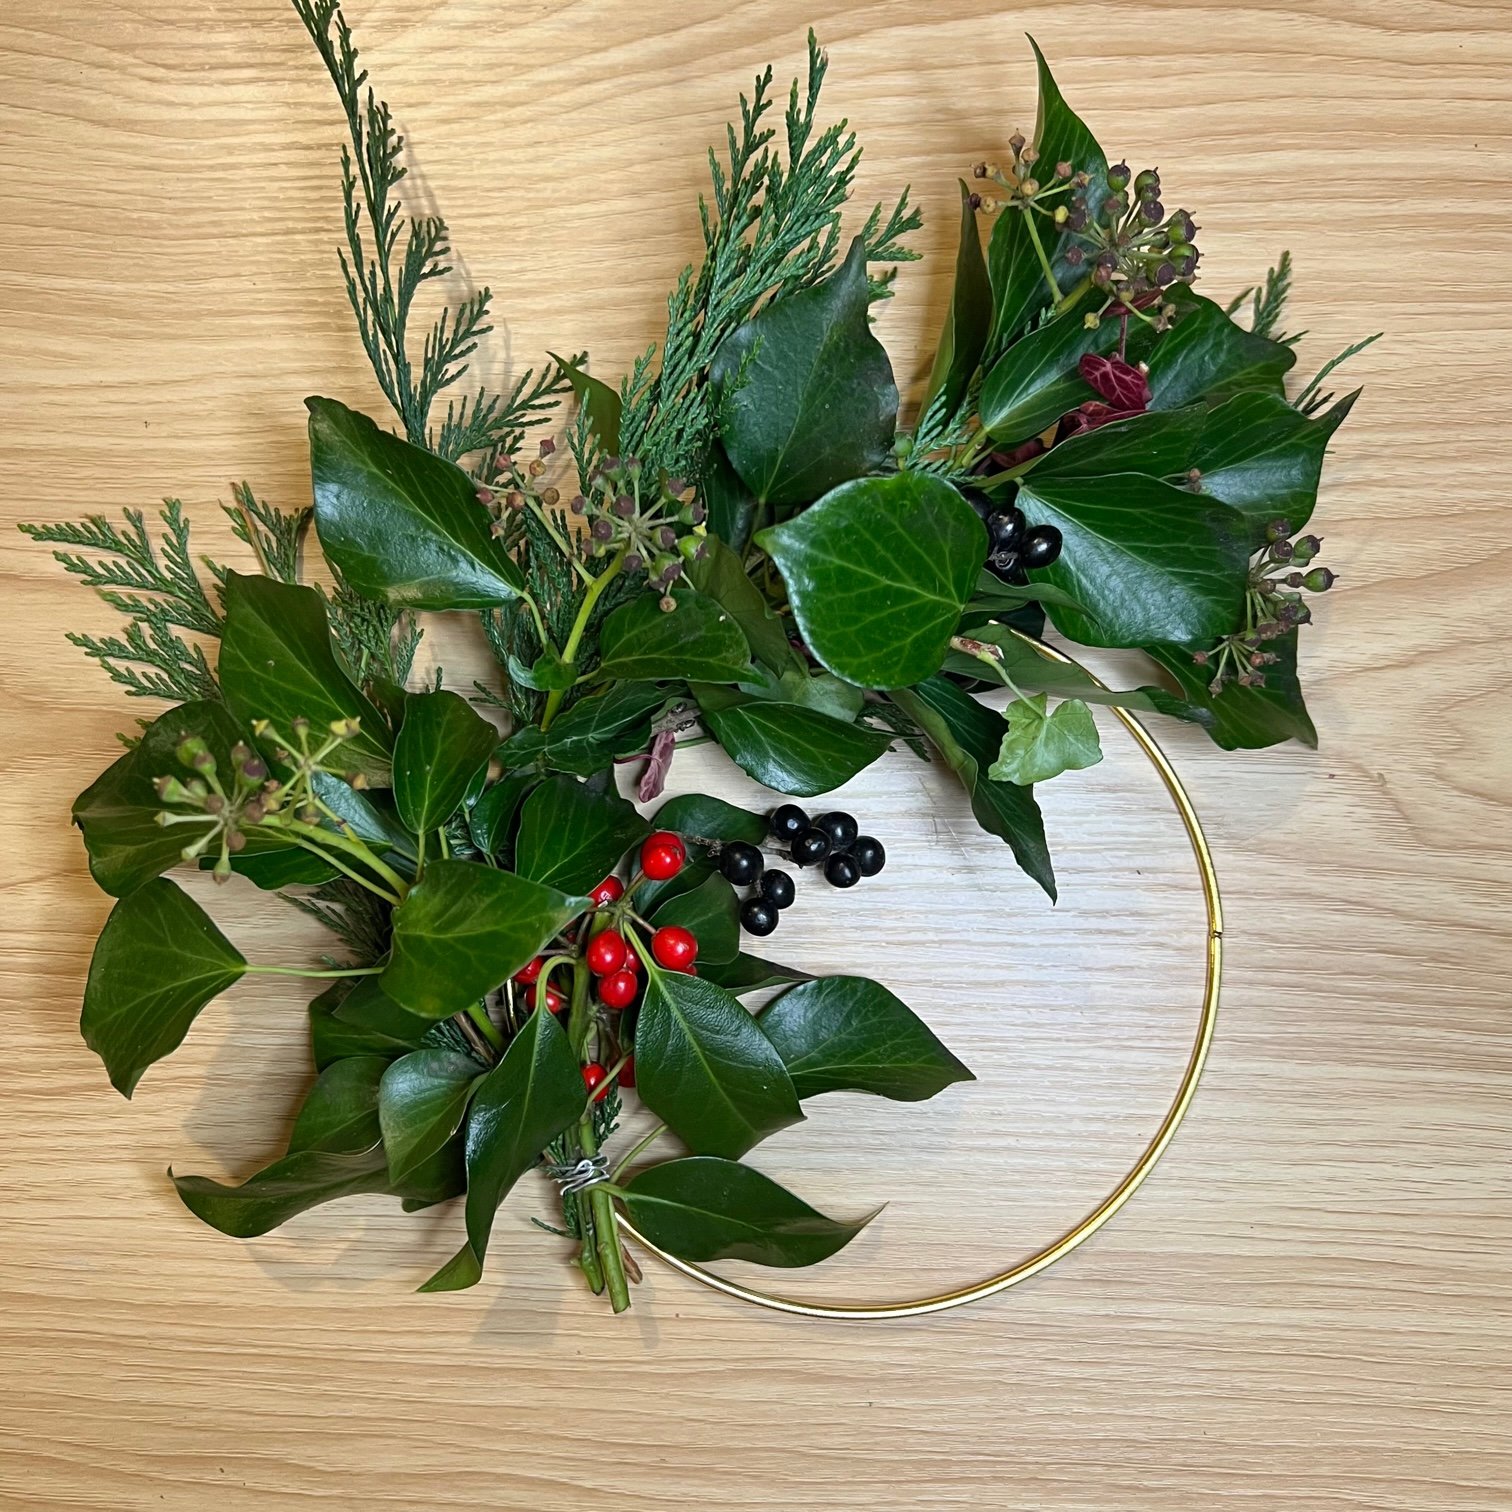 Make your own evergreen wreath - Mud & Bloom